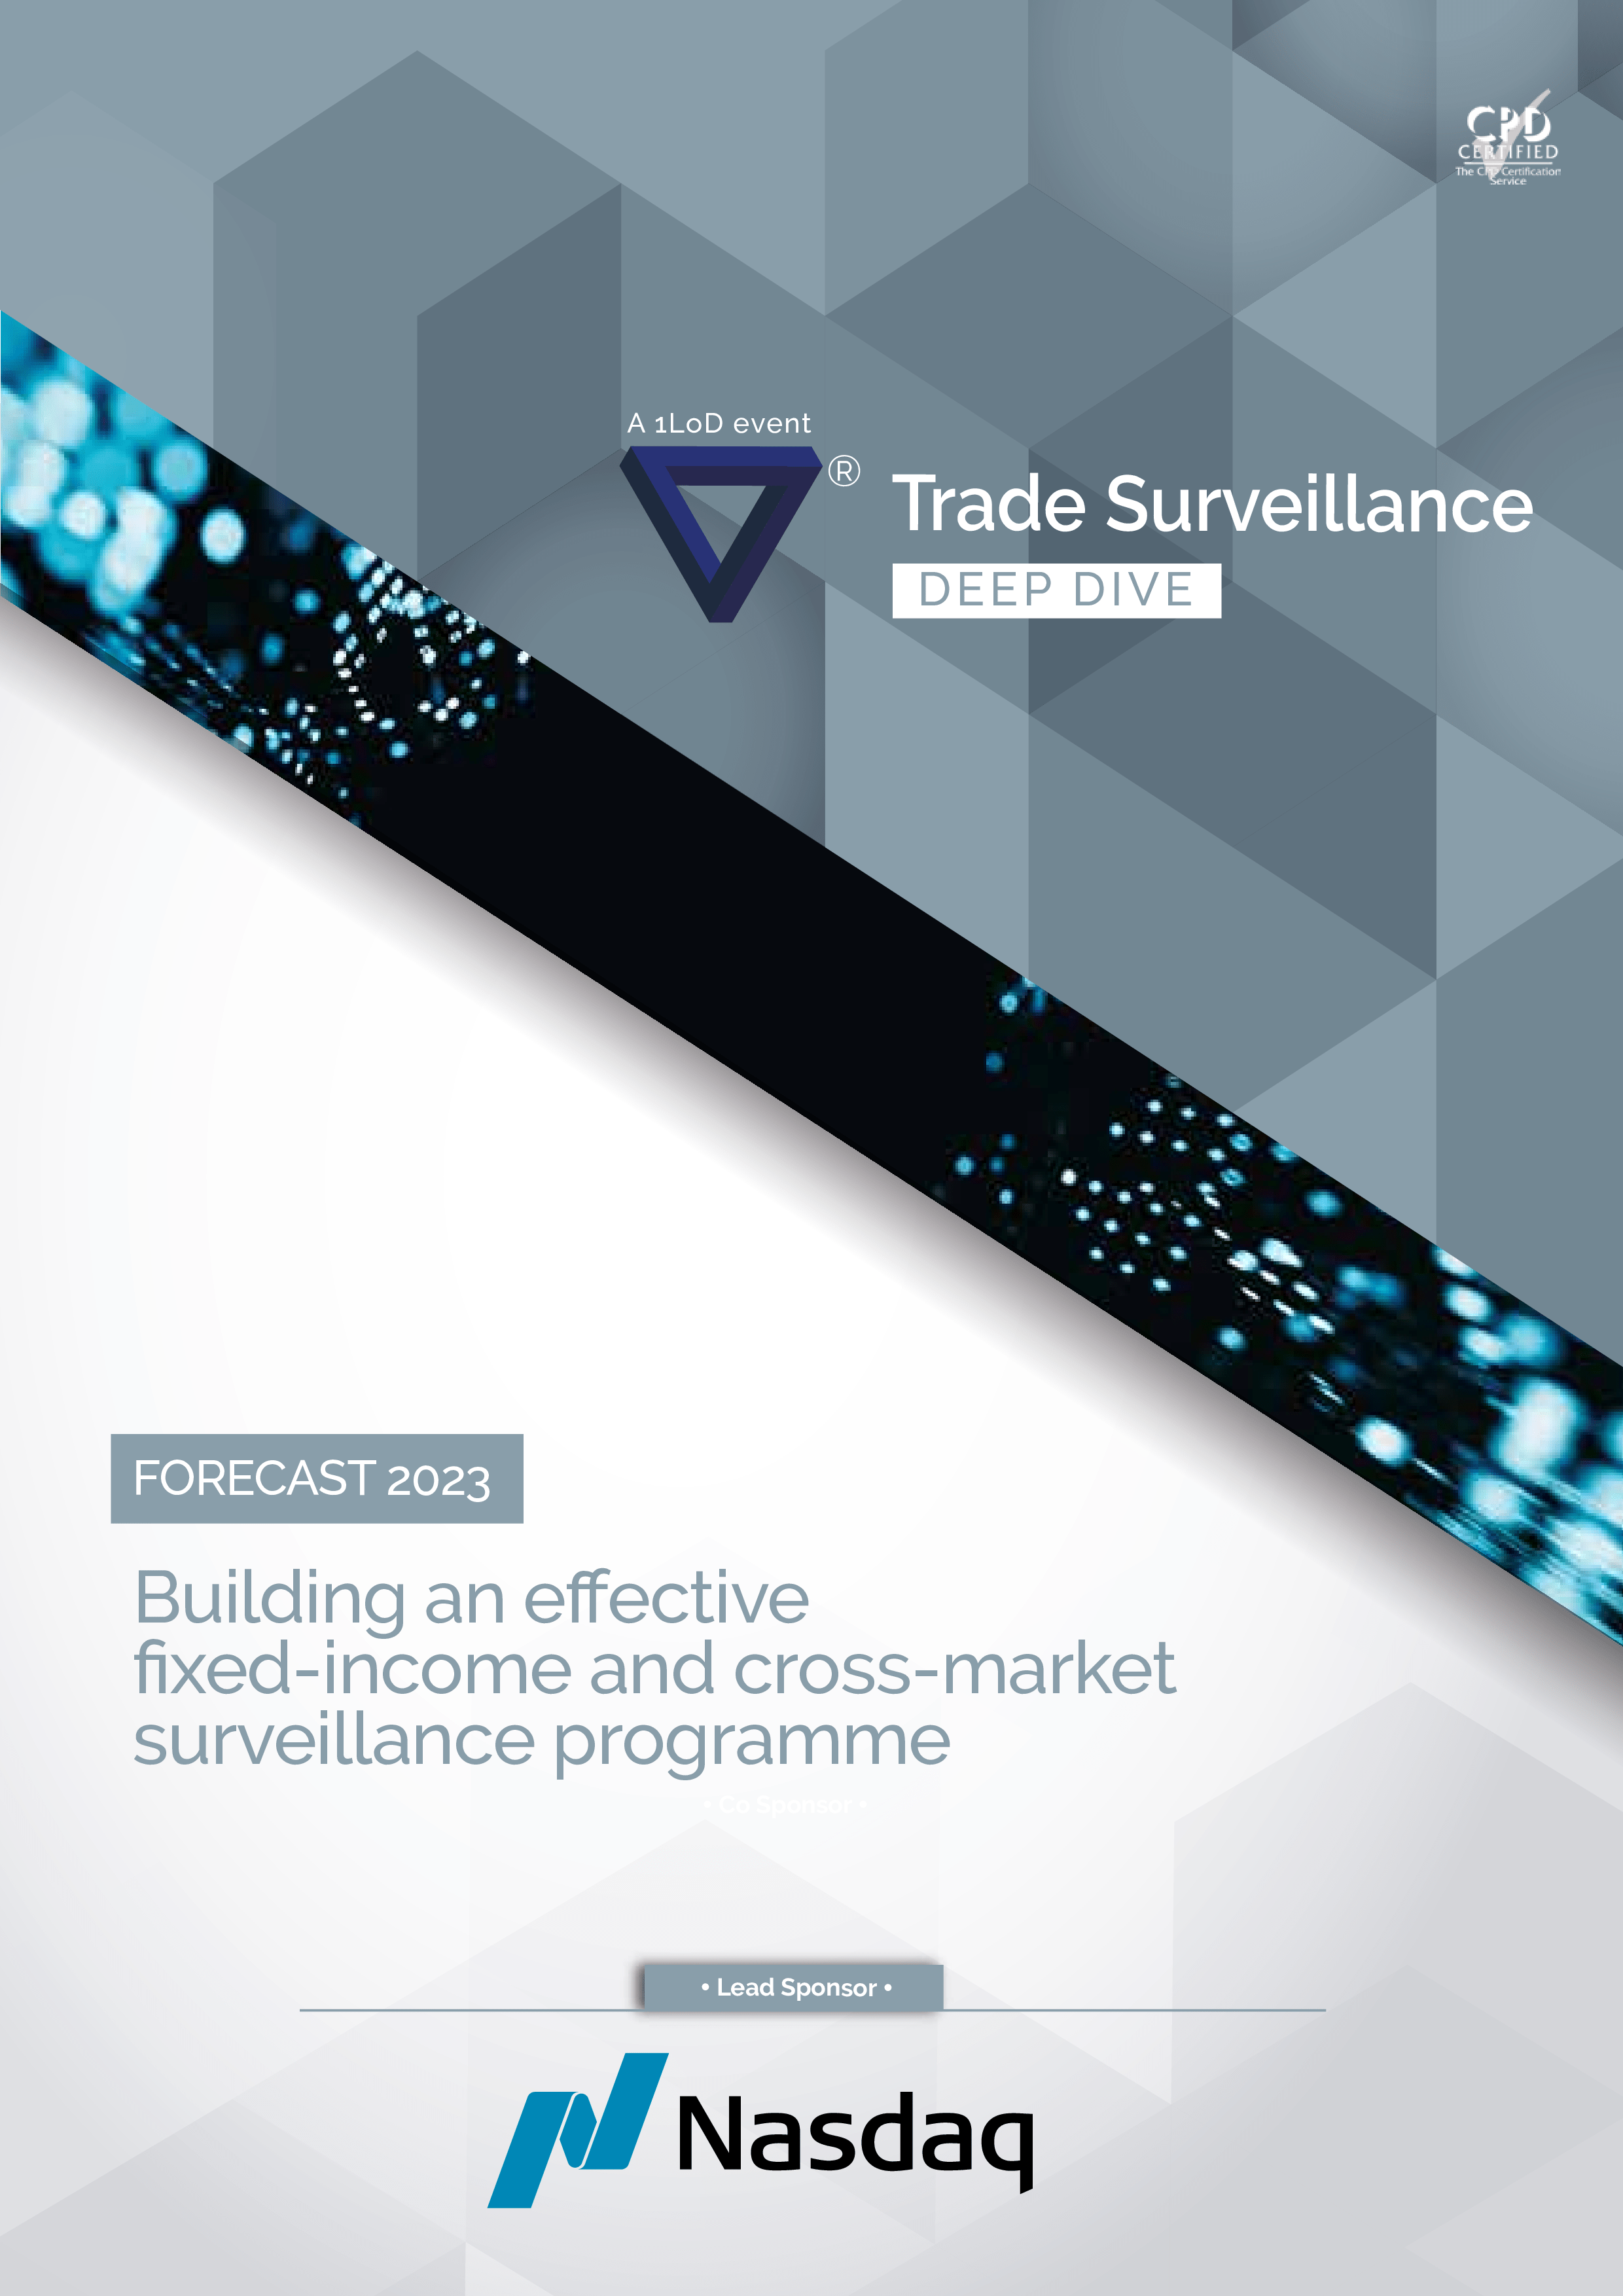 Building an effective fixed-income and cross-market surveillance programme